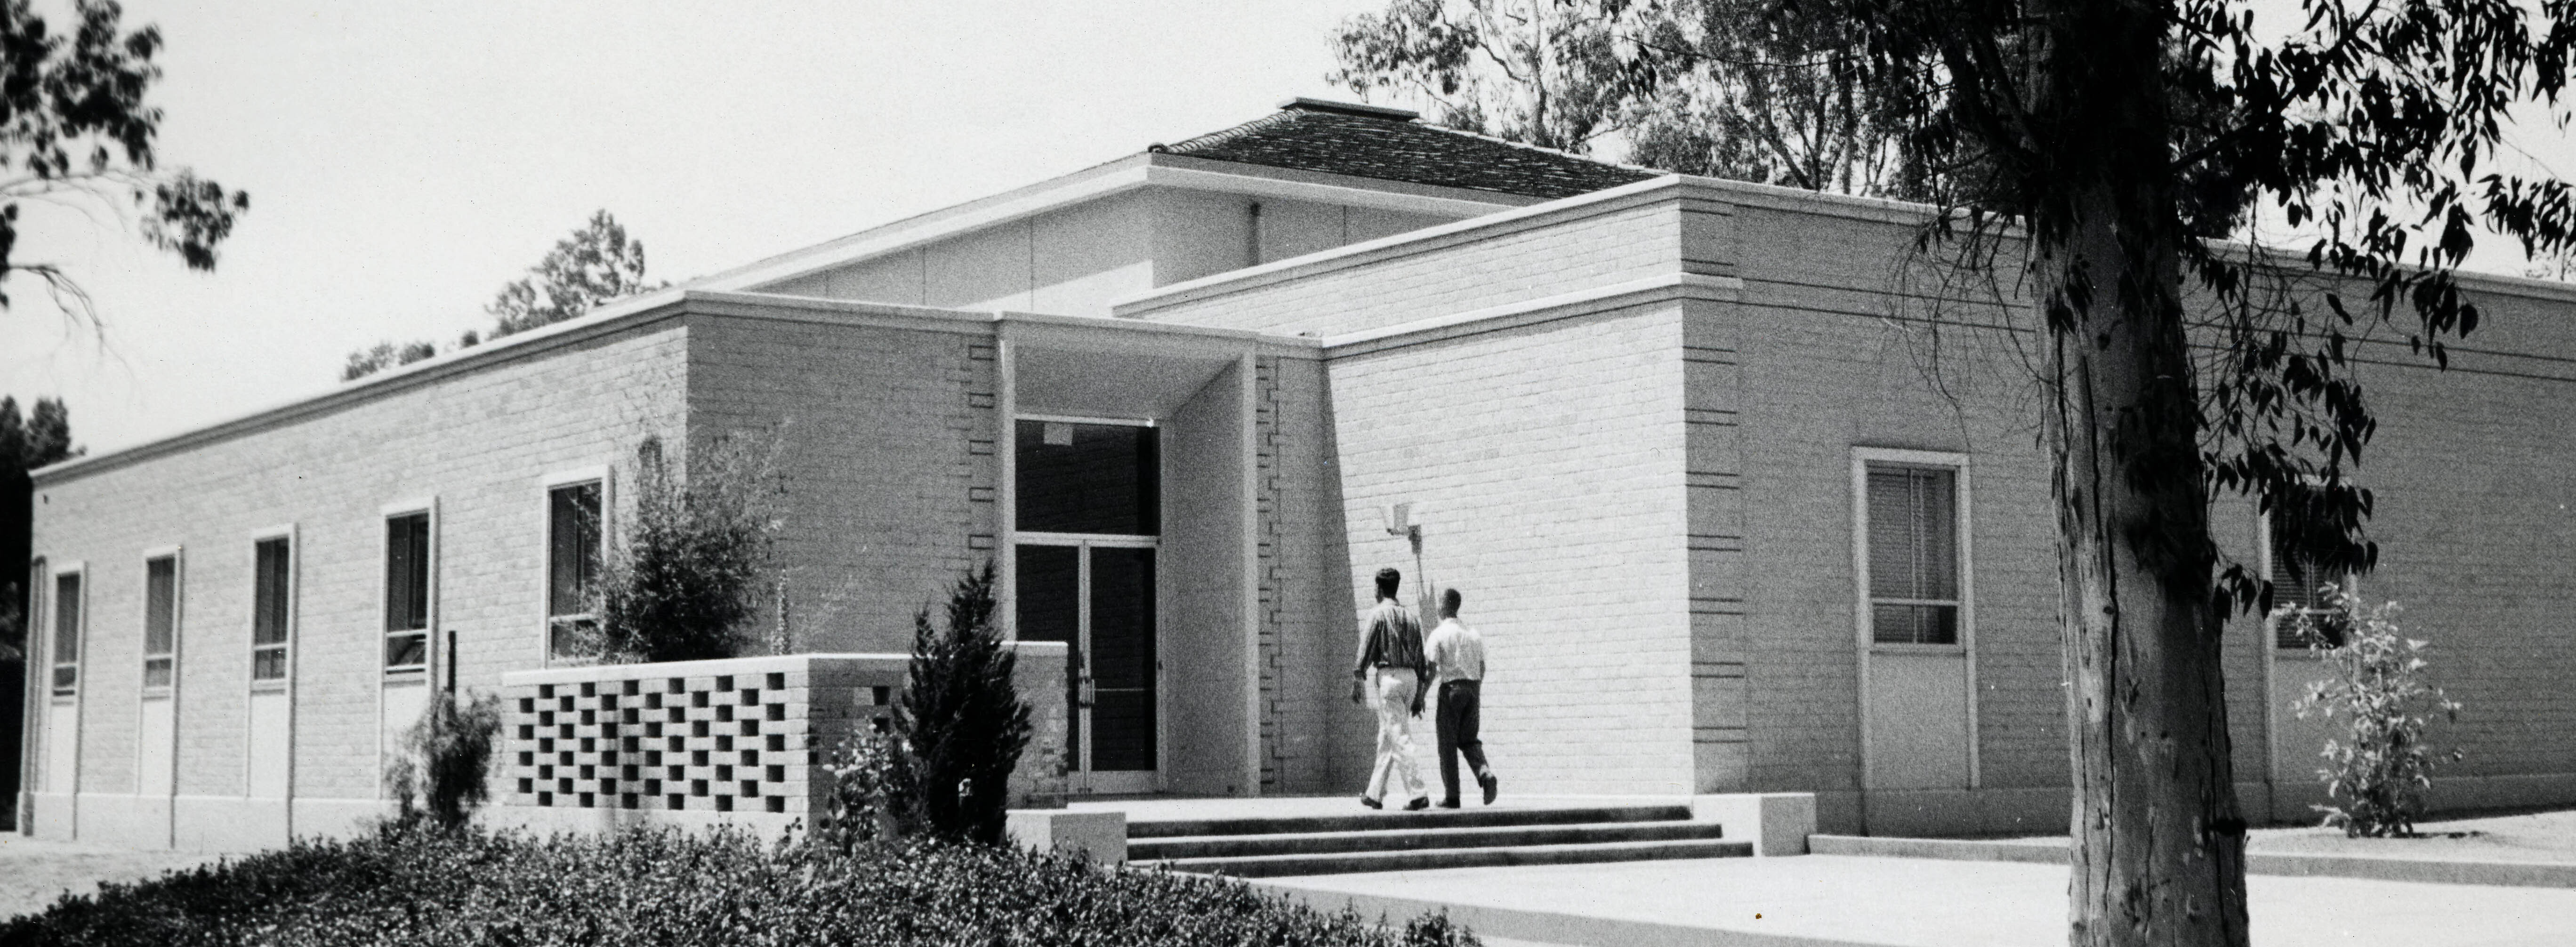 Baxter Science Building built in 1955.